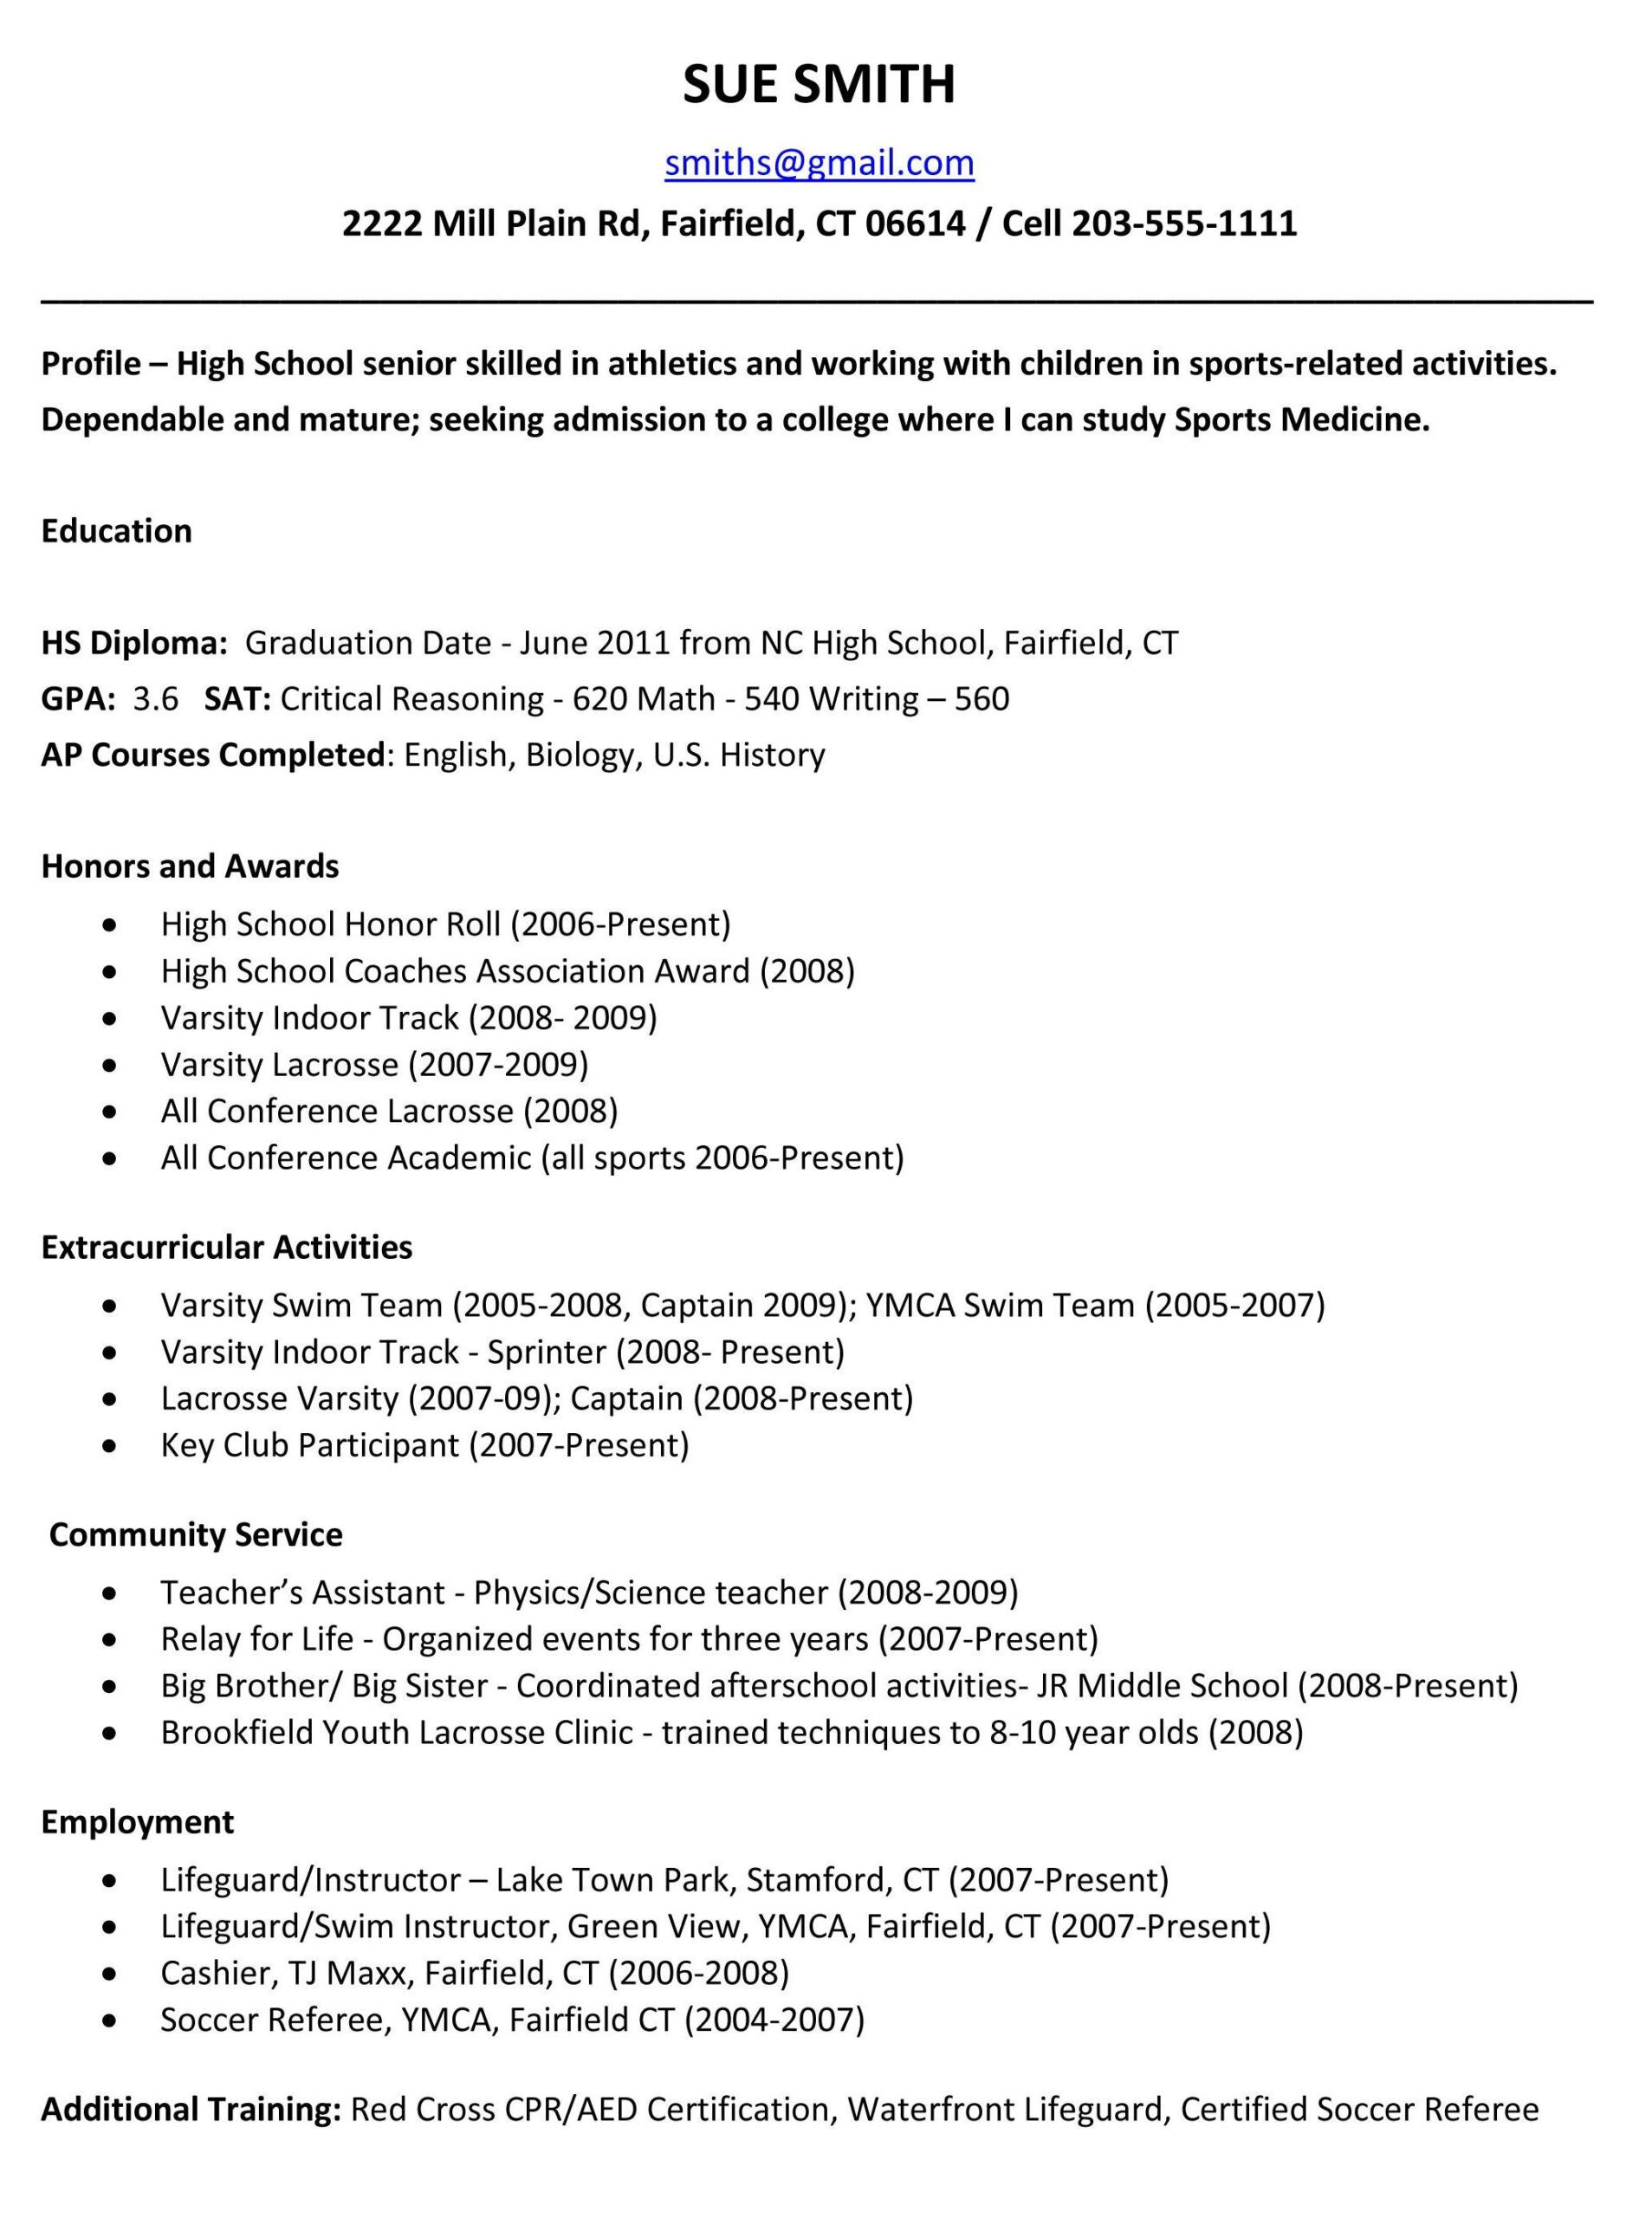 Sample Resume Summary for College Student Sample Resume Summary for High School Student – Good Resume Examples